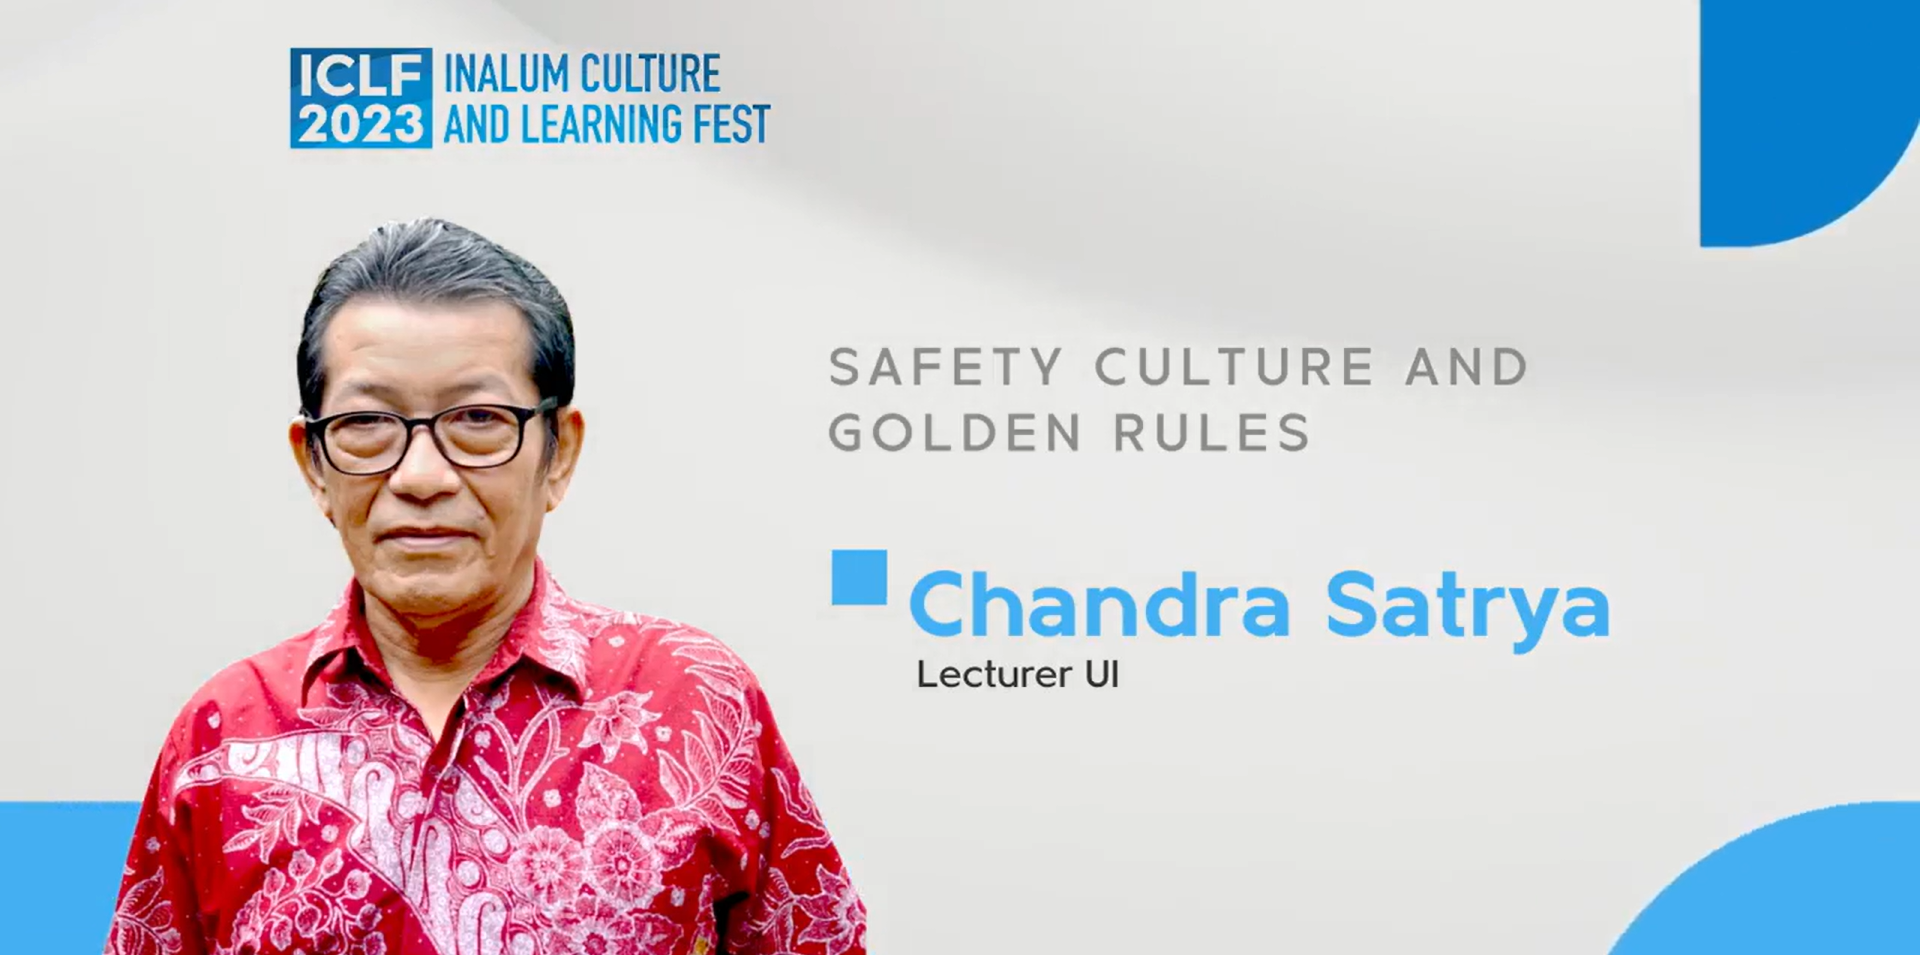 ICLF 2023 - Safety Culture and Golden Rules